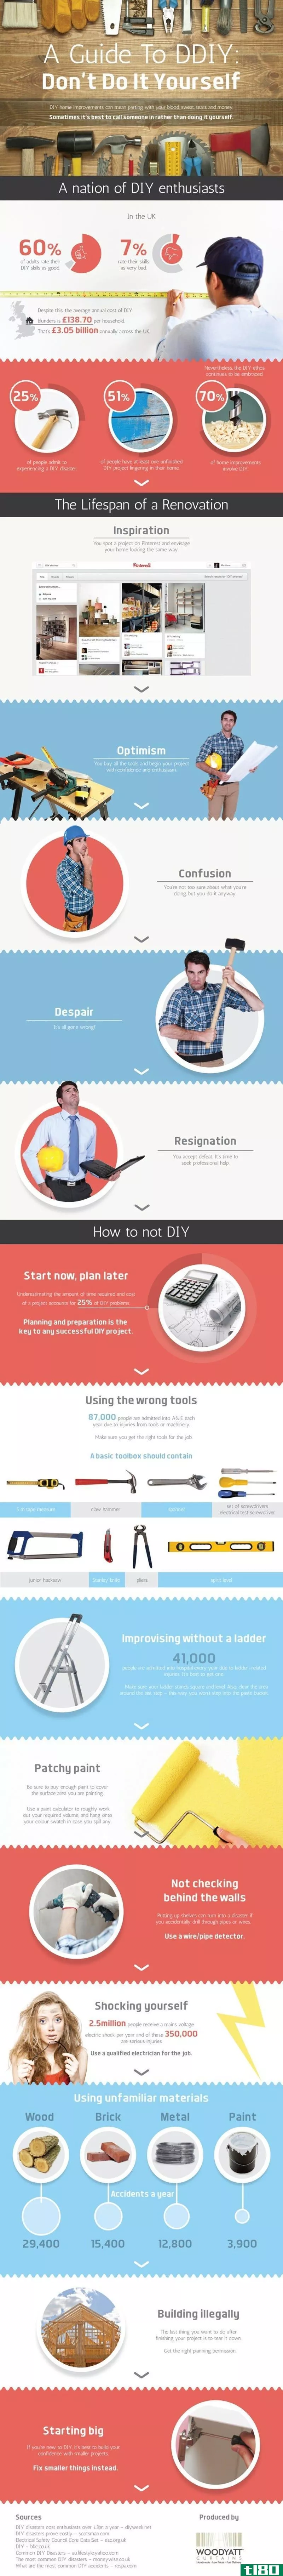 Illustration for article titled This Graphic Warns Of Common Pitfalls that Can Wreck Your DIY Project